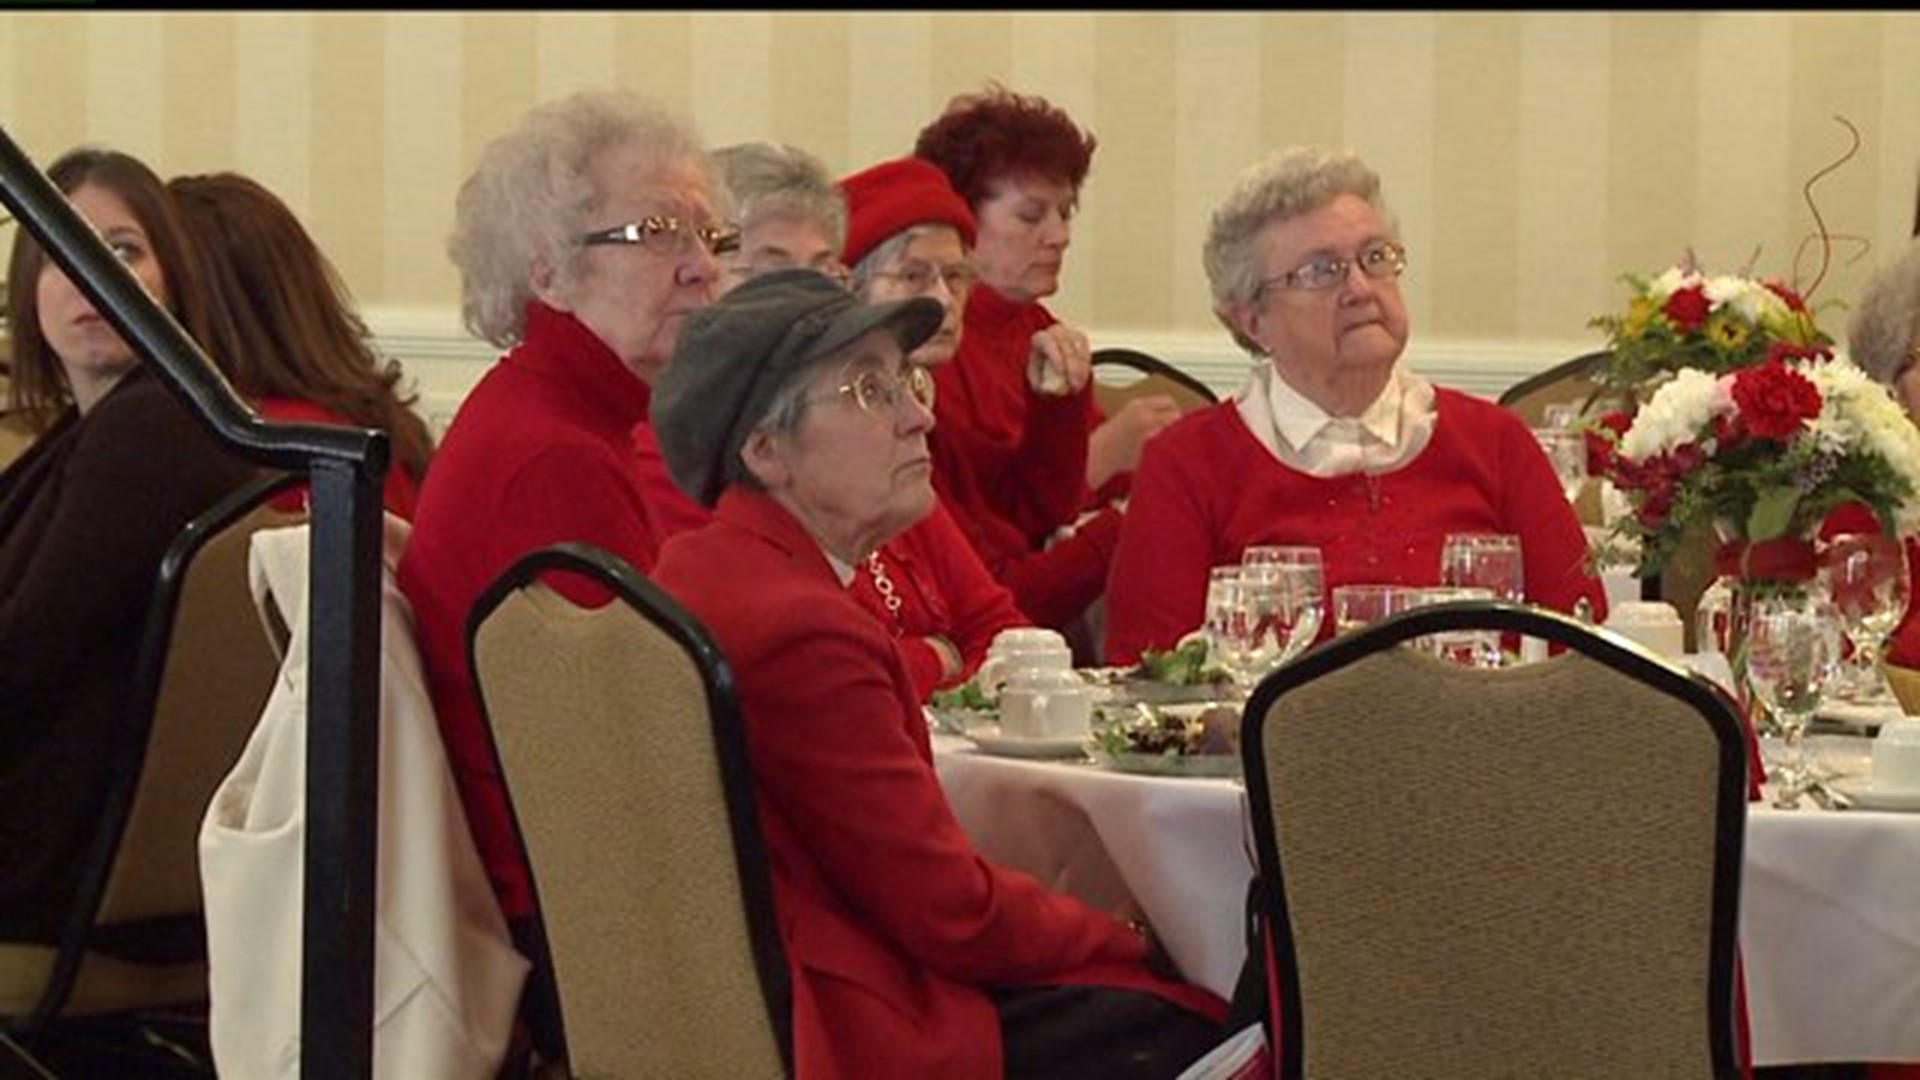 Go red for women event in York